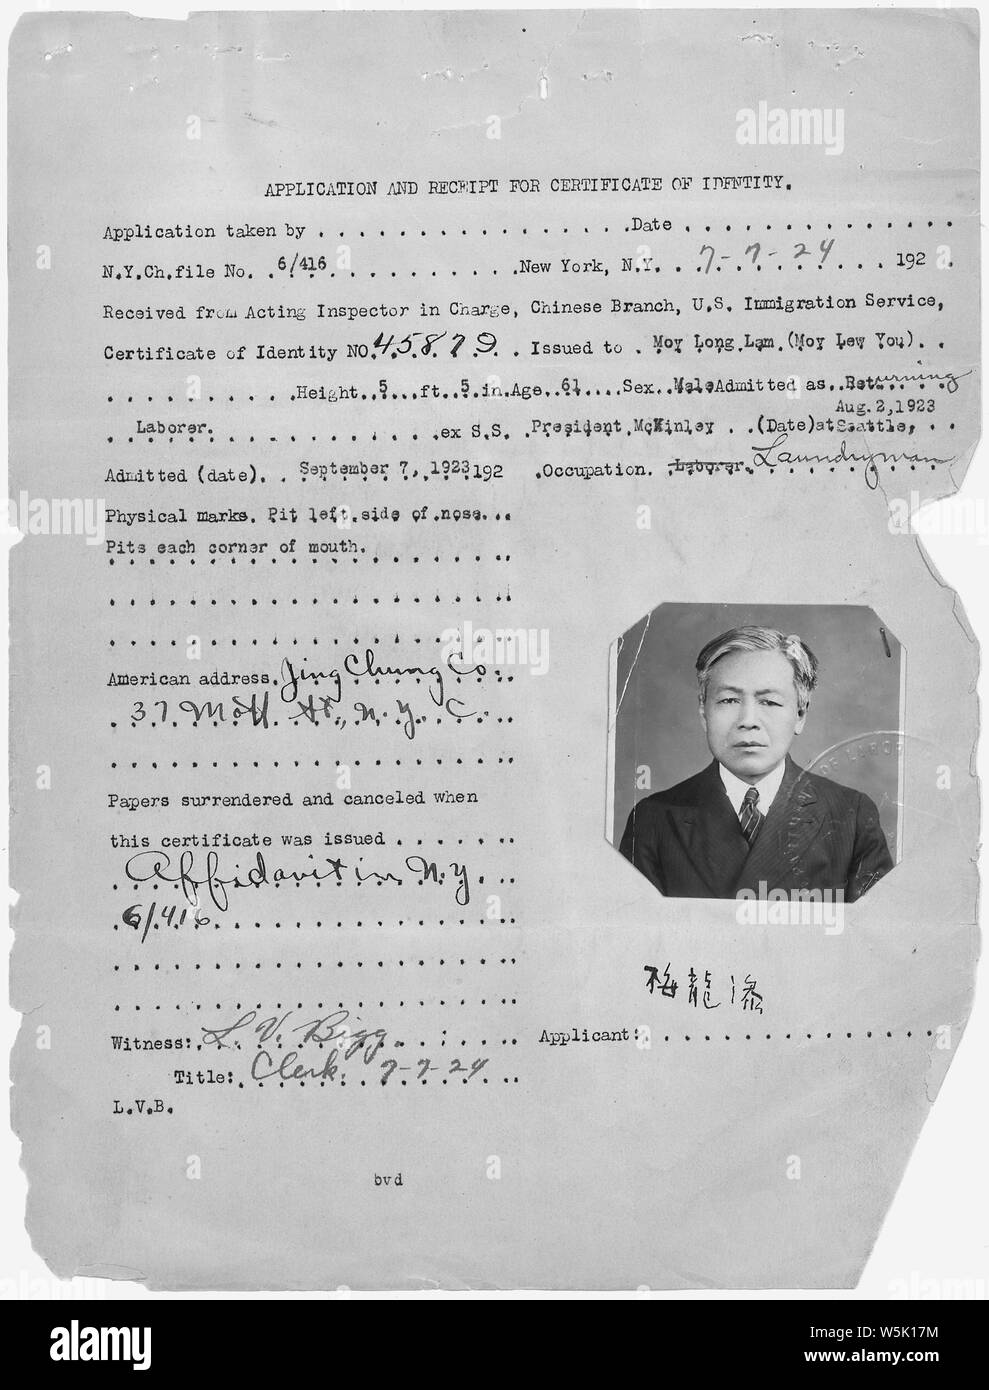 Application and Receipt for Certificate of Identity; Scope and content:  This document is filed with the Chinese Exclusion Act case file on Moy Long Lam. Stock Photo